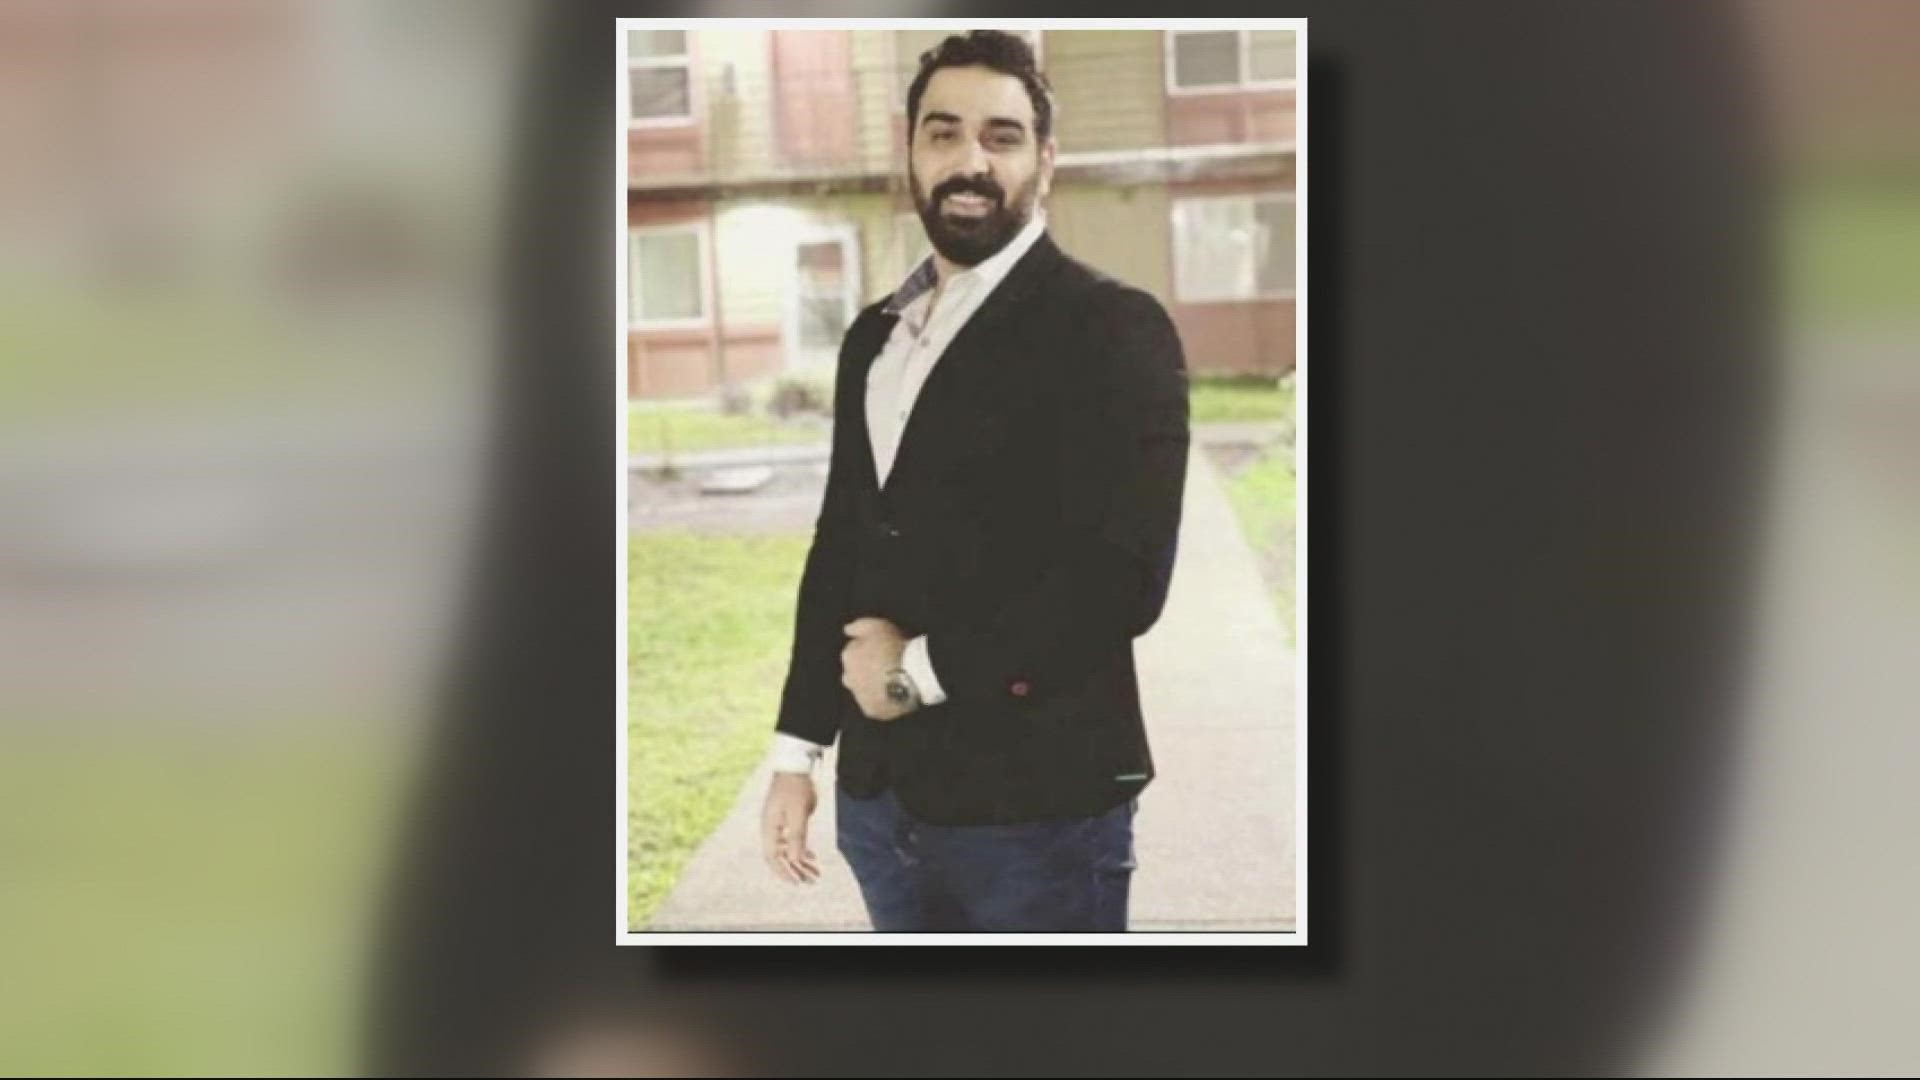 Dhulfiqar Mseer was shot and killed in December 2020 while driving for Uber in Northeast Portland. The FBI is now offering $15,000 for information about his death.